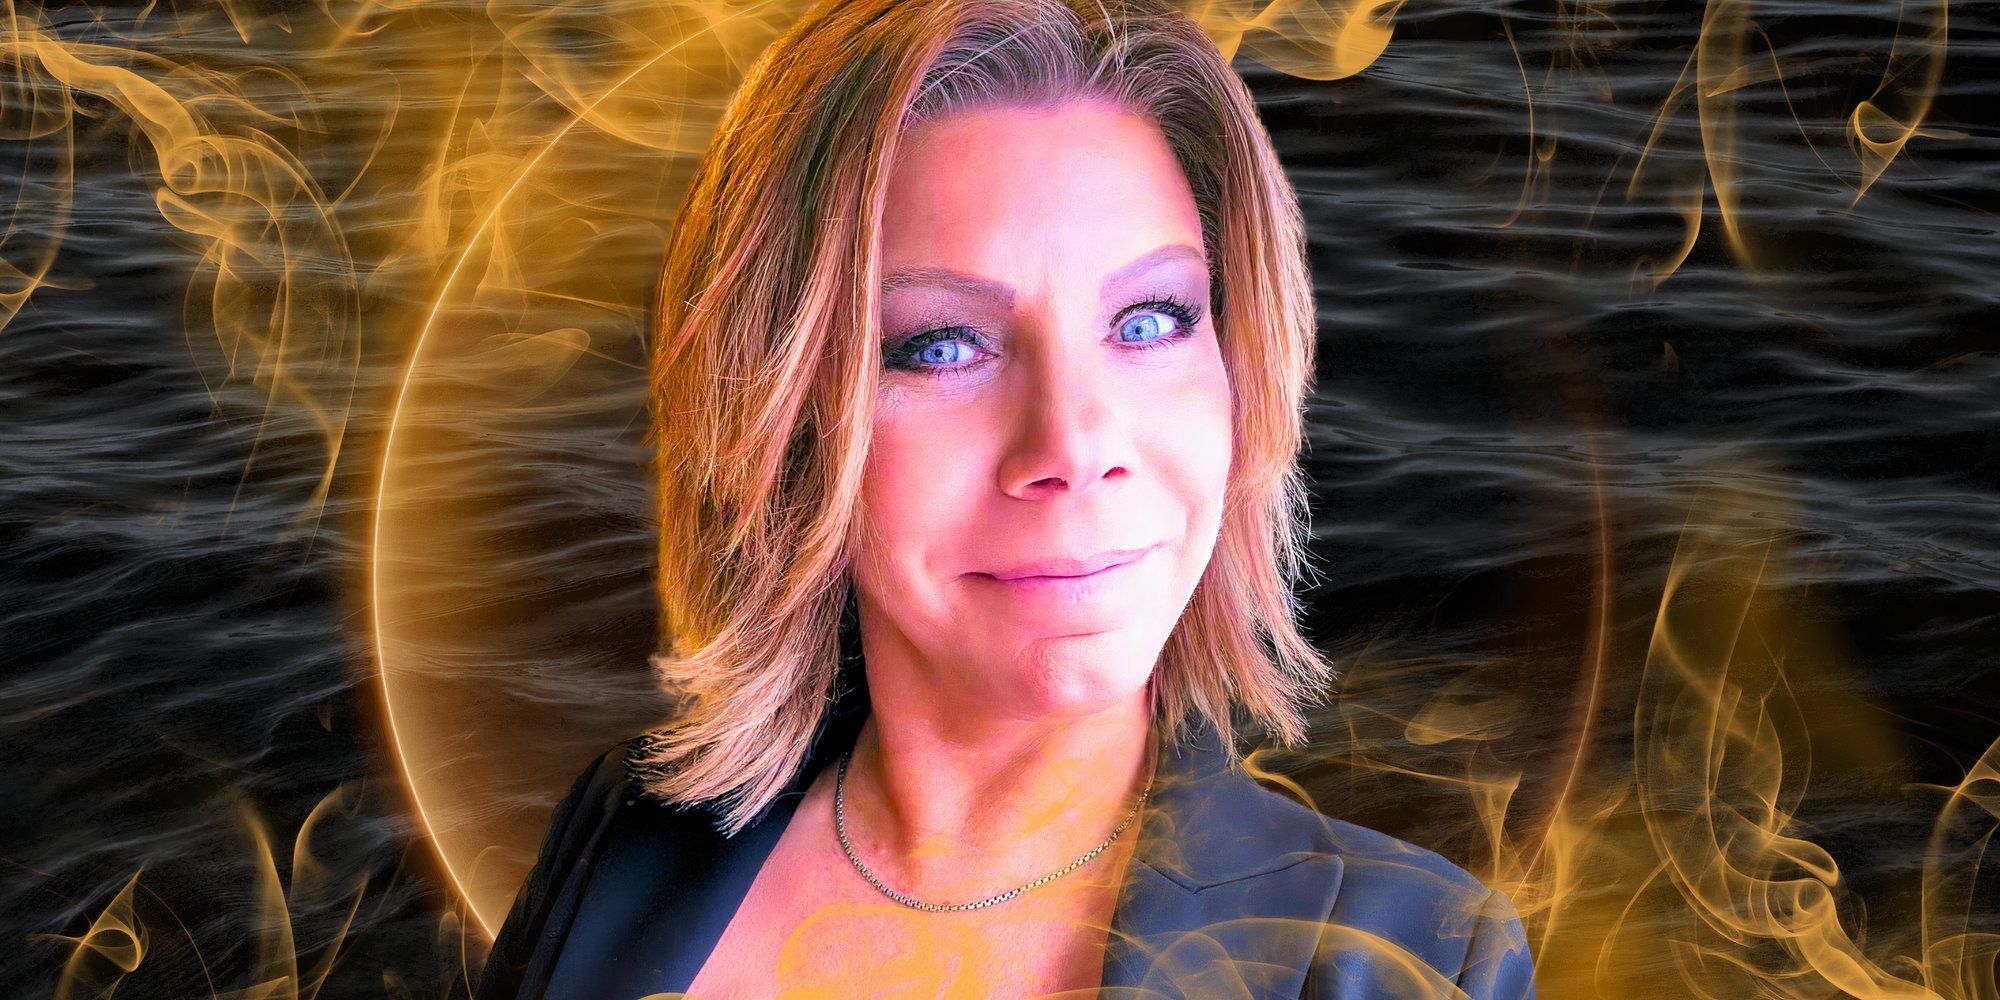 sister wives star meri brown in a montage of her smiling with a smoky background in black and gold